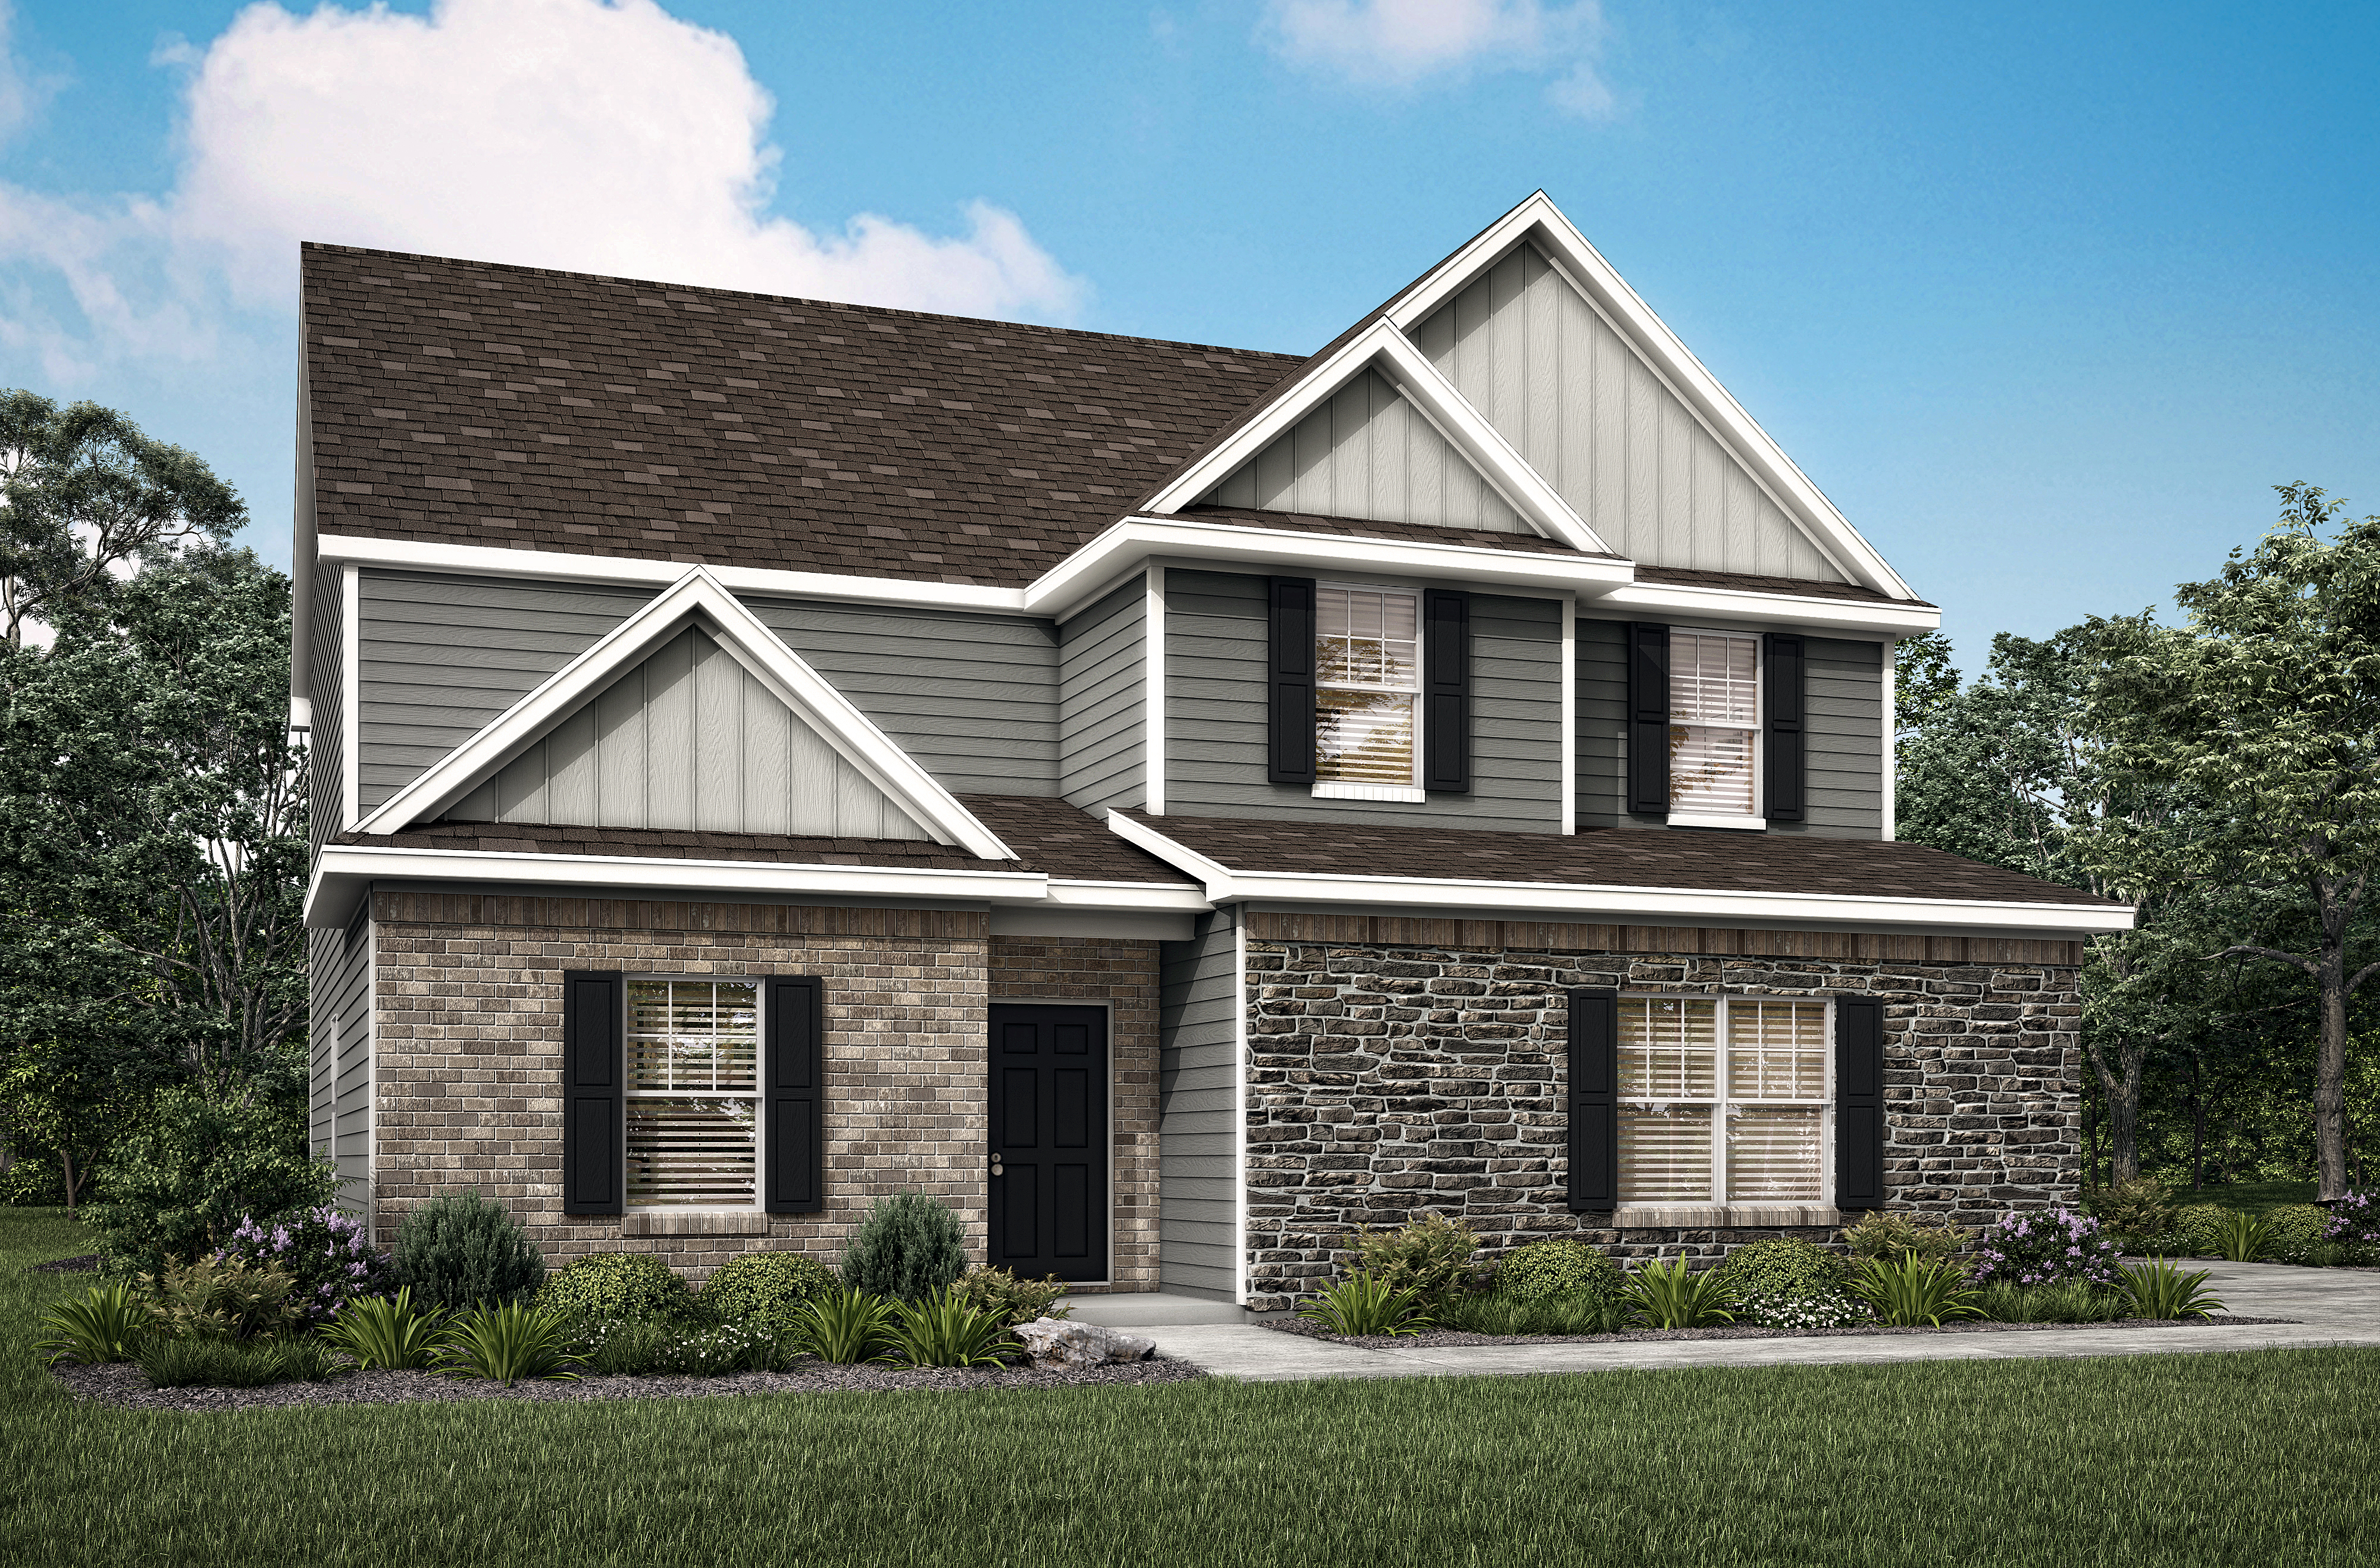 The Hartwell plan at Meadows Farm by LGI Homes